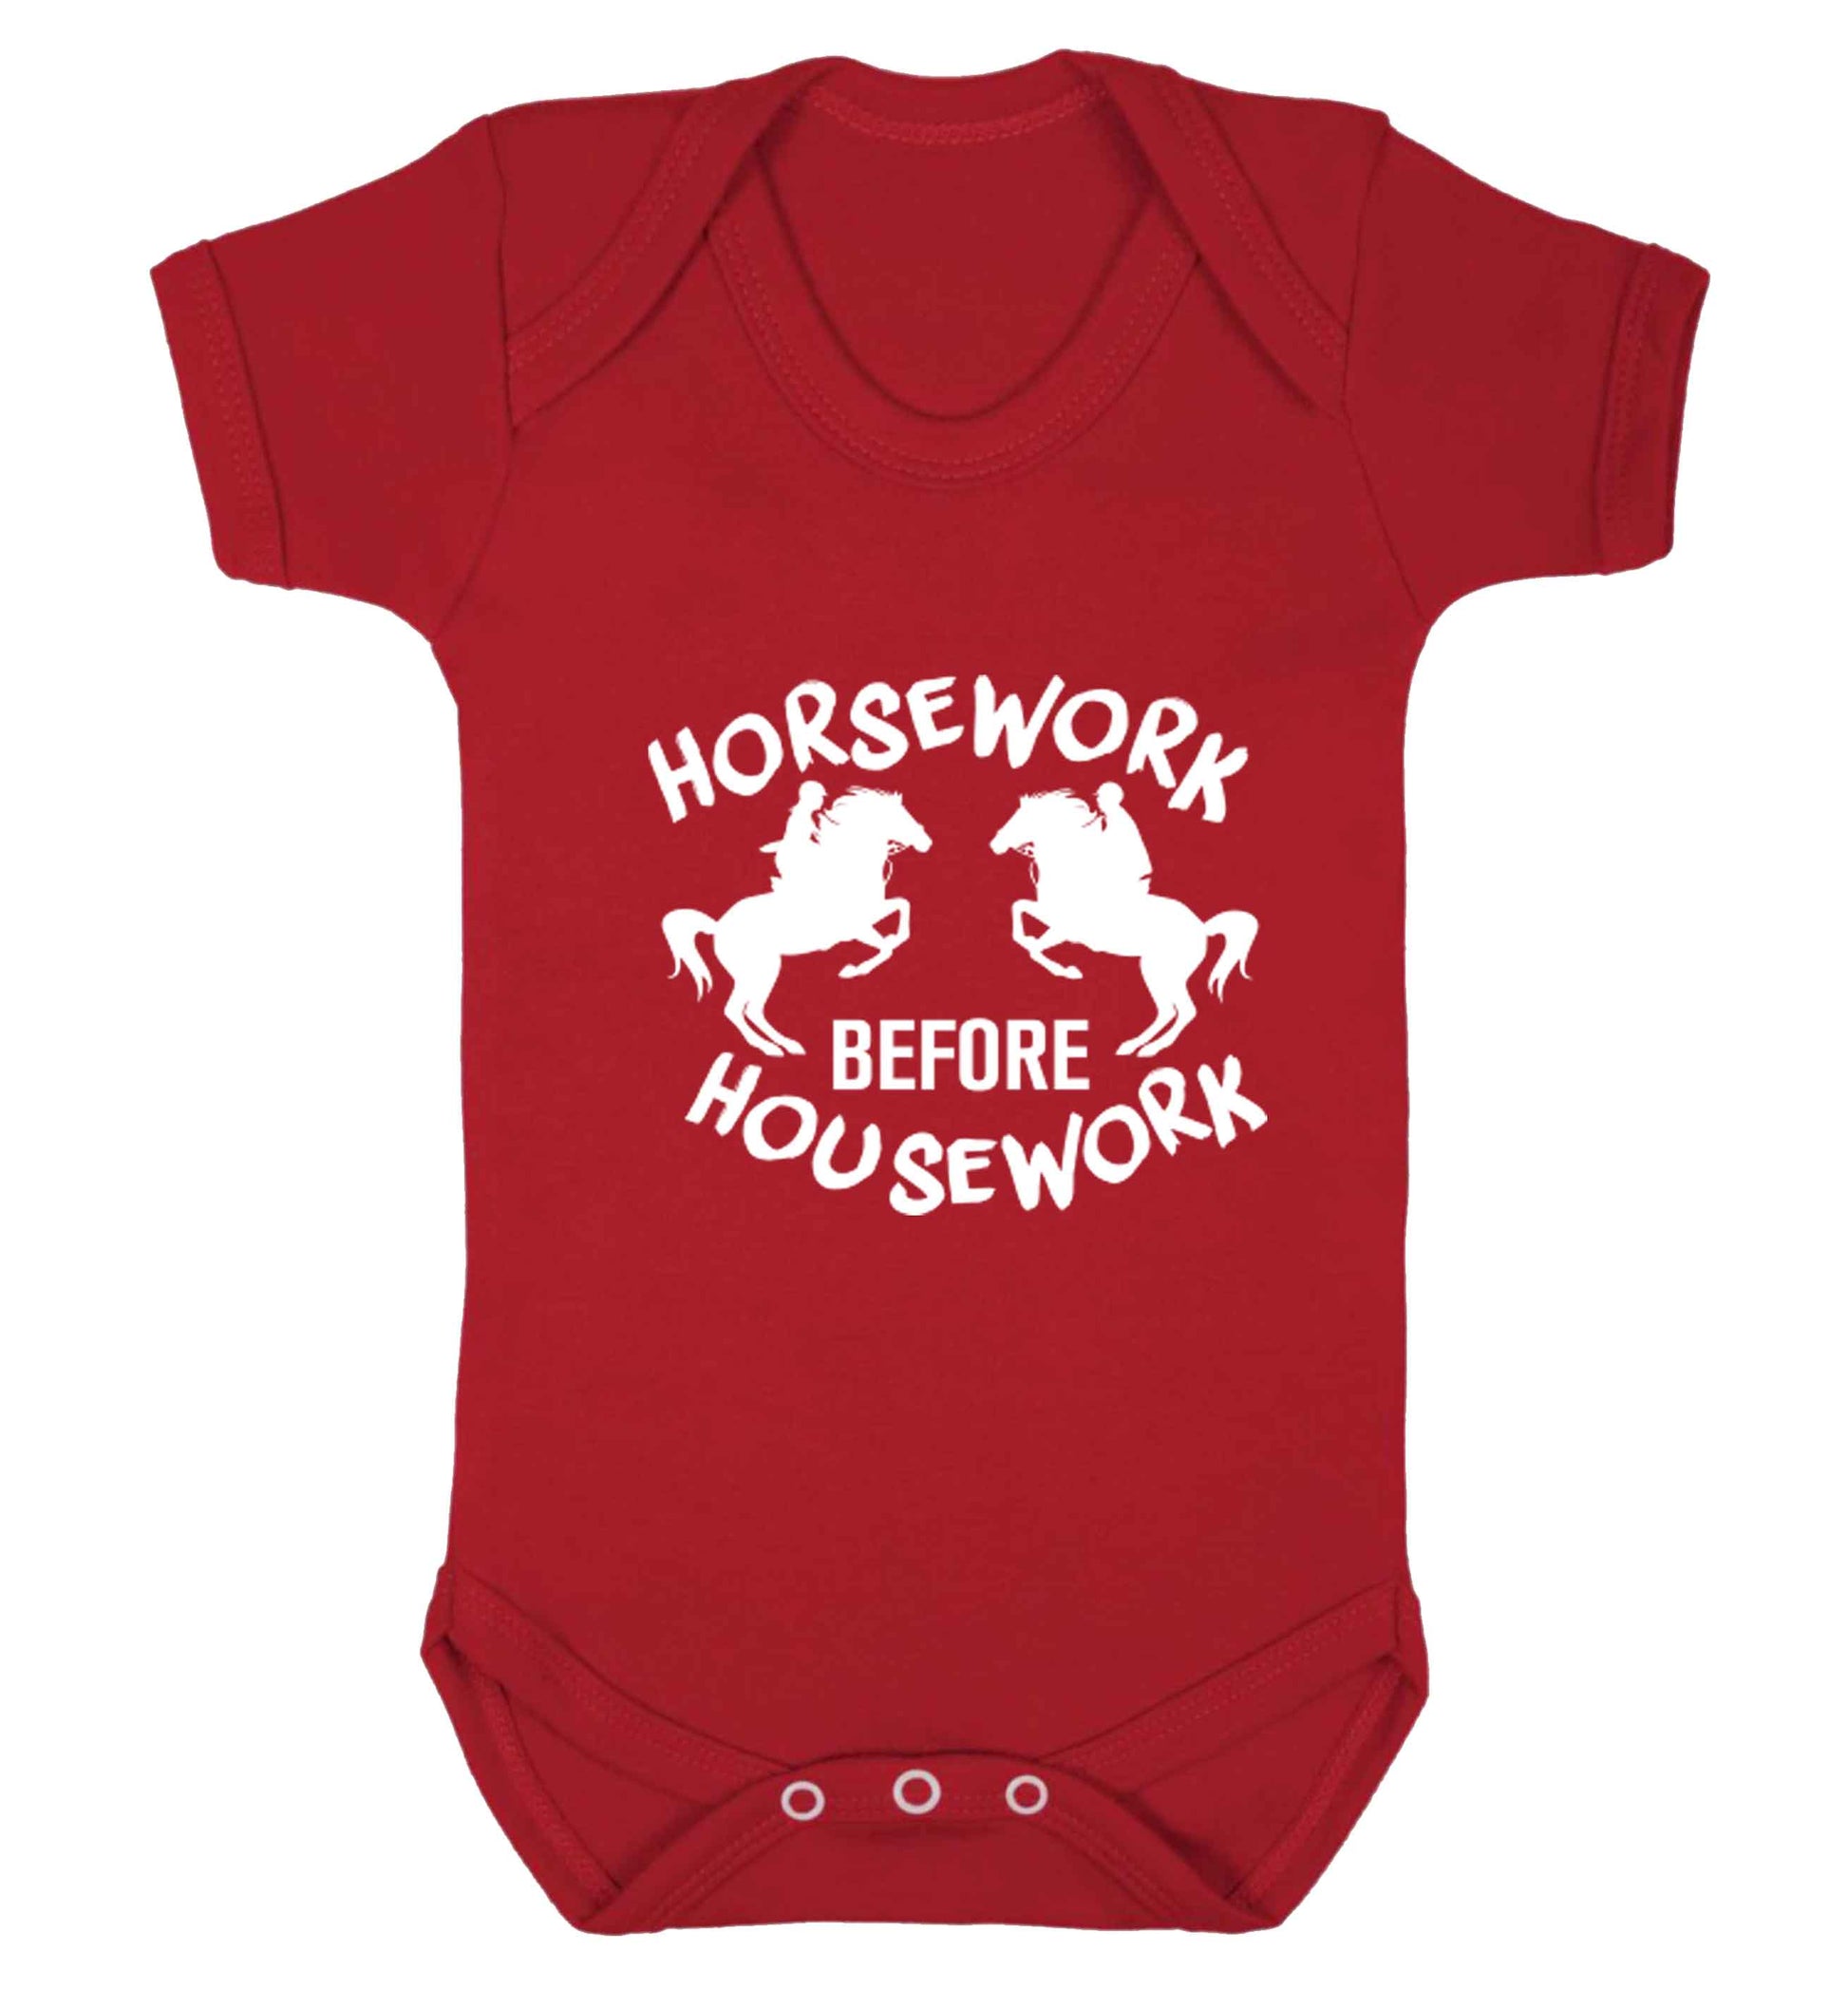 Horsework before housework baby vest red 18-24 months